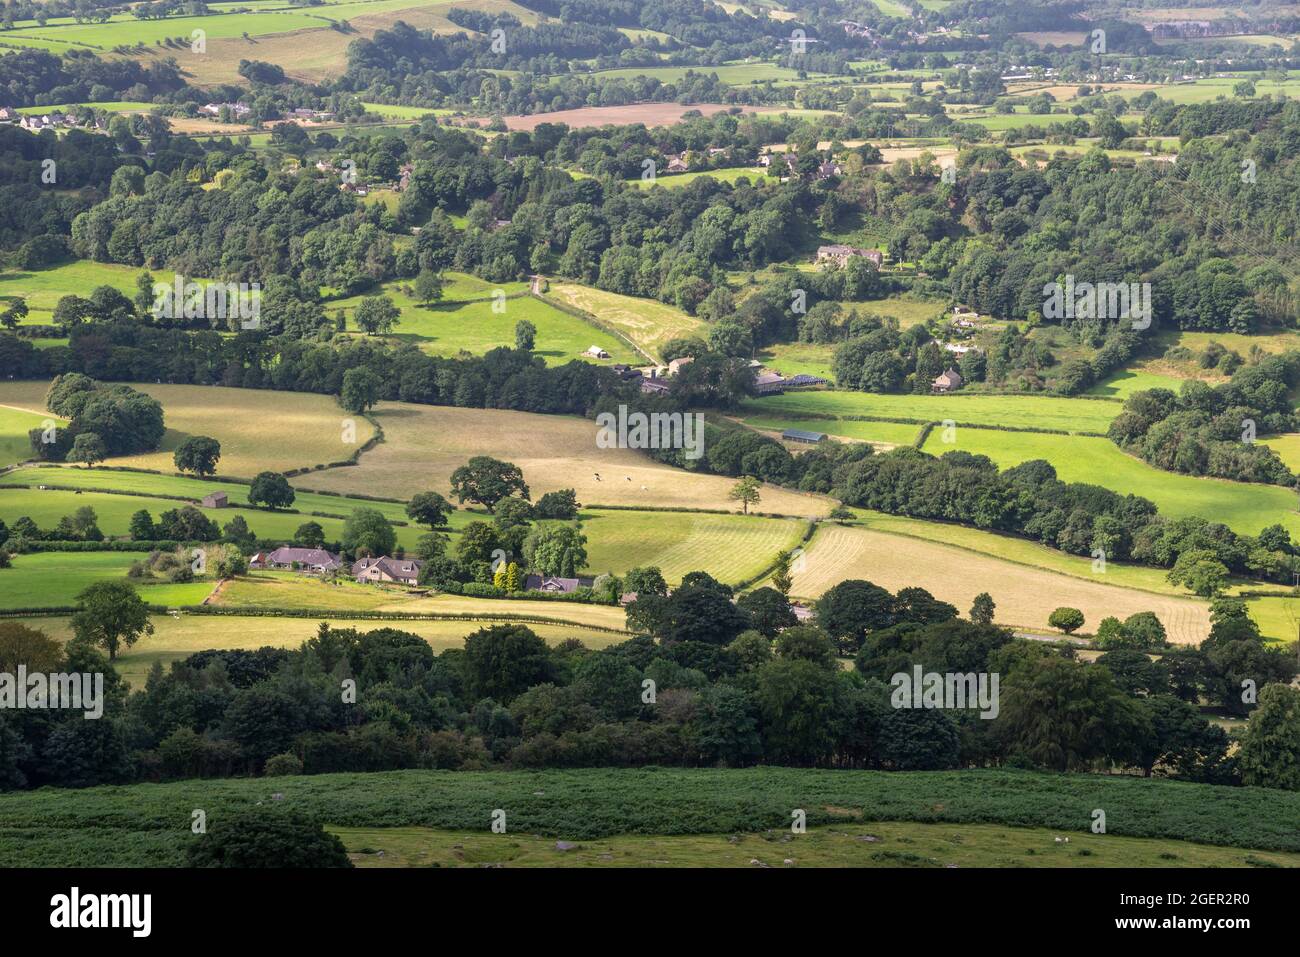 Summer in the English countryside. View of fields and woods around Bamford in the Peak District national park, Derbyshire, England. Stock Photo